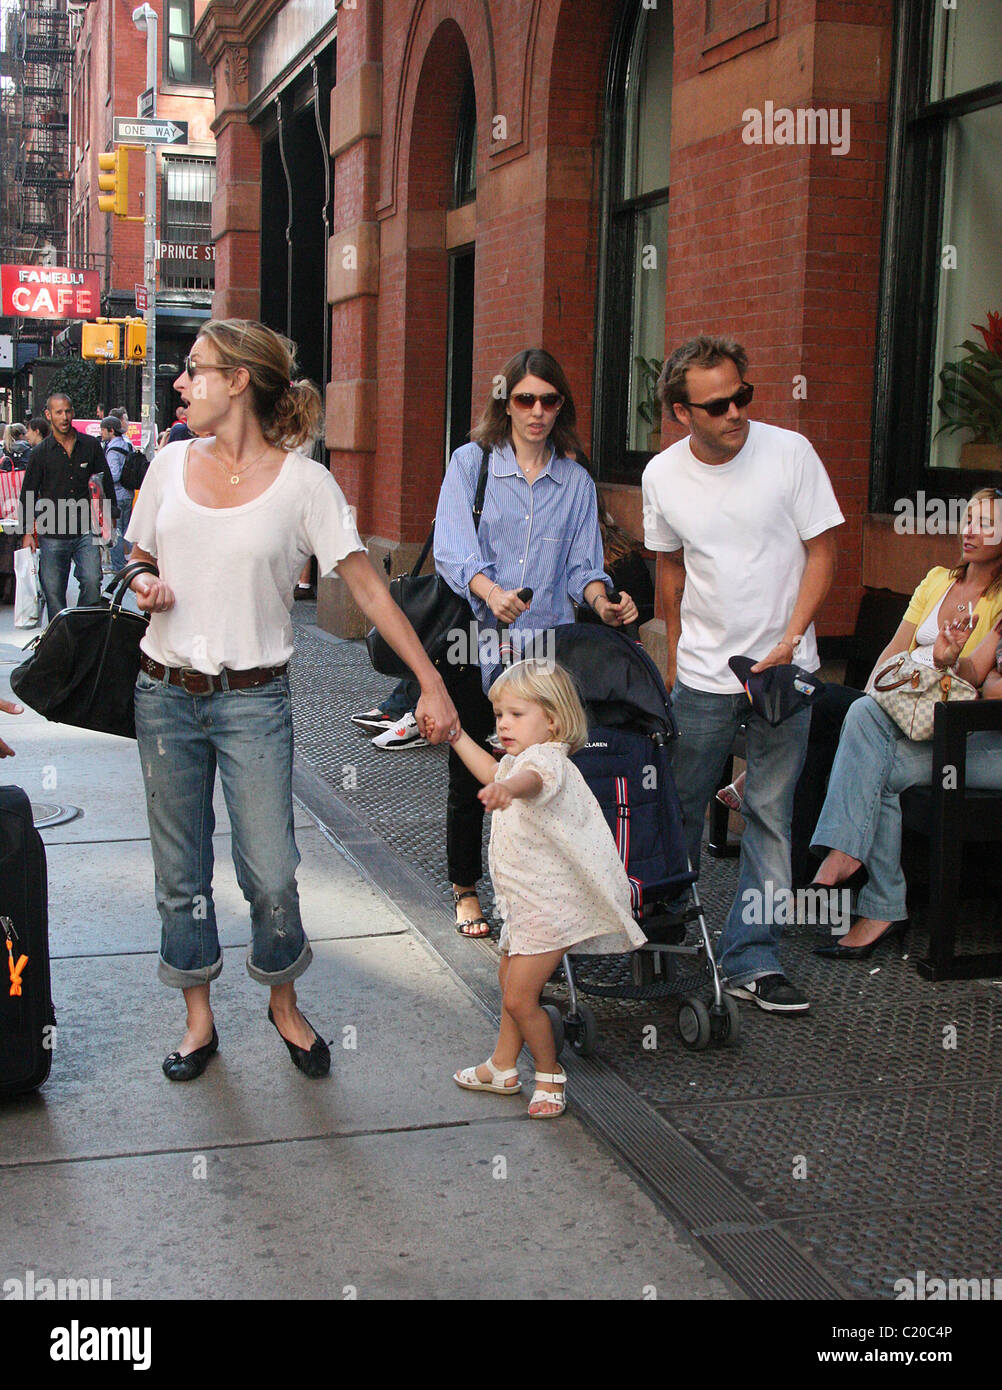 Sofia Coppola and Stephen Dorff out and about in SoHo New York